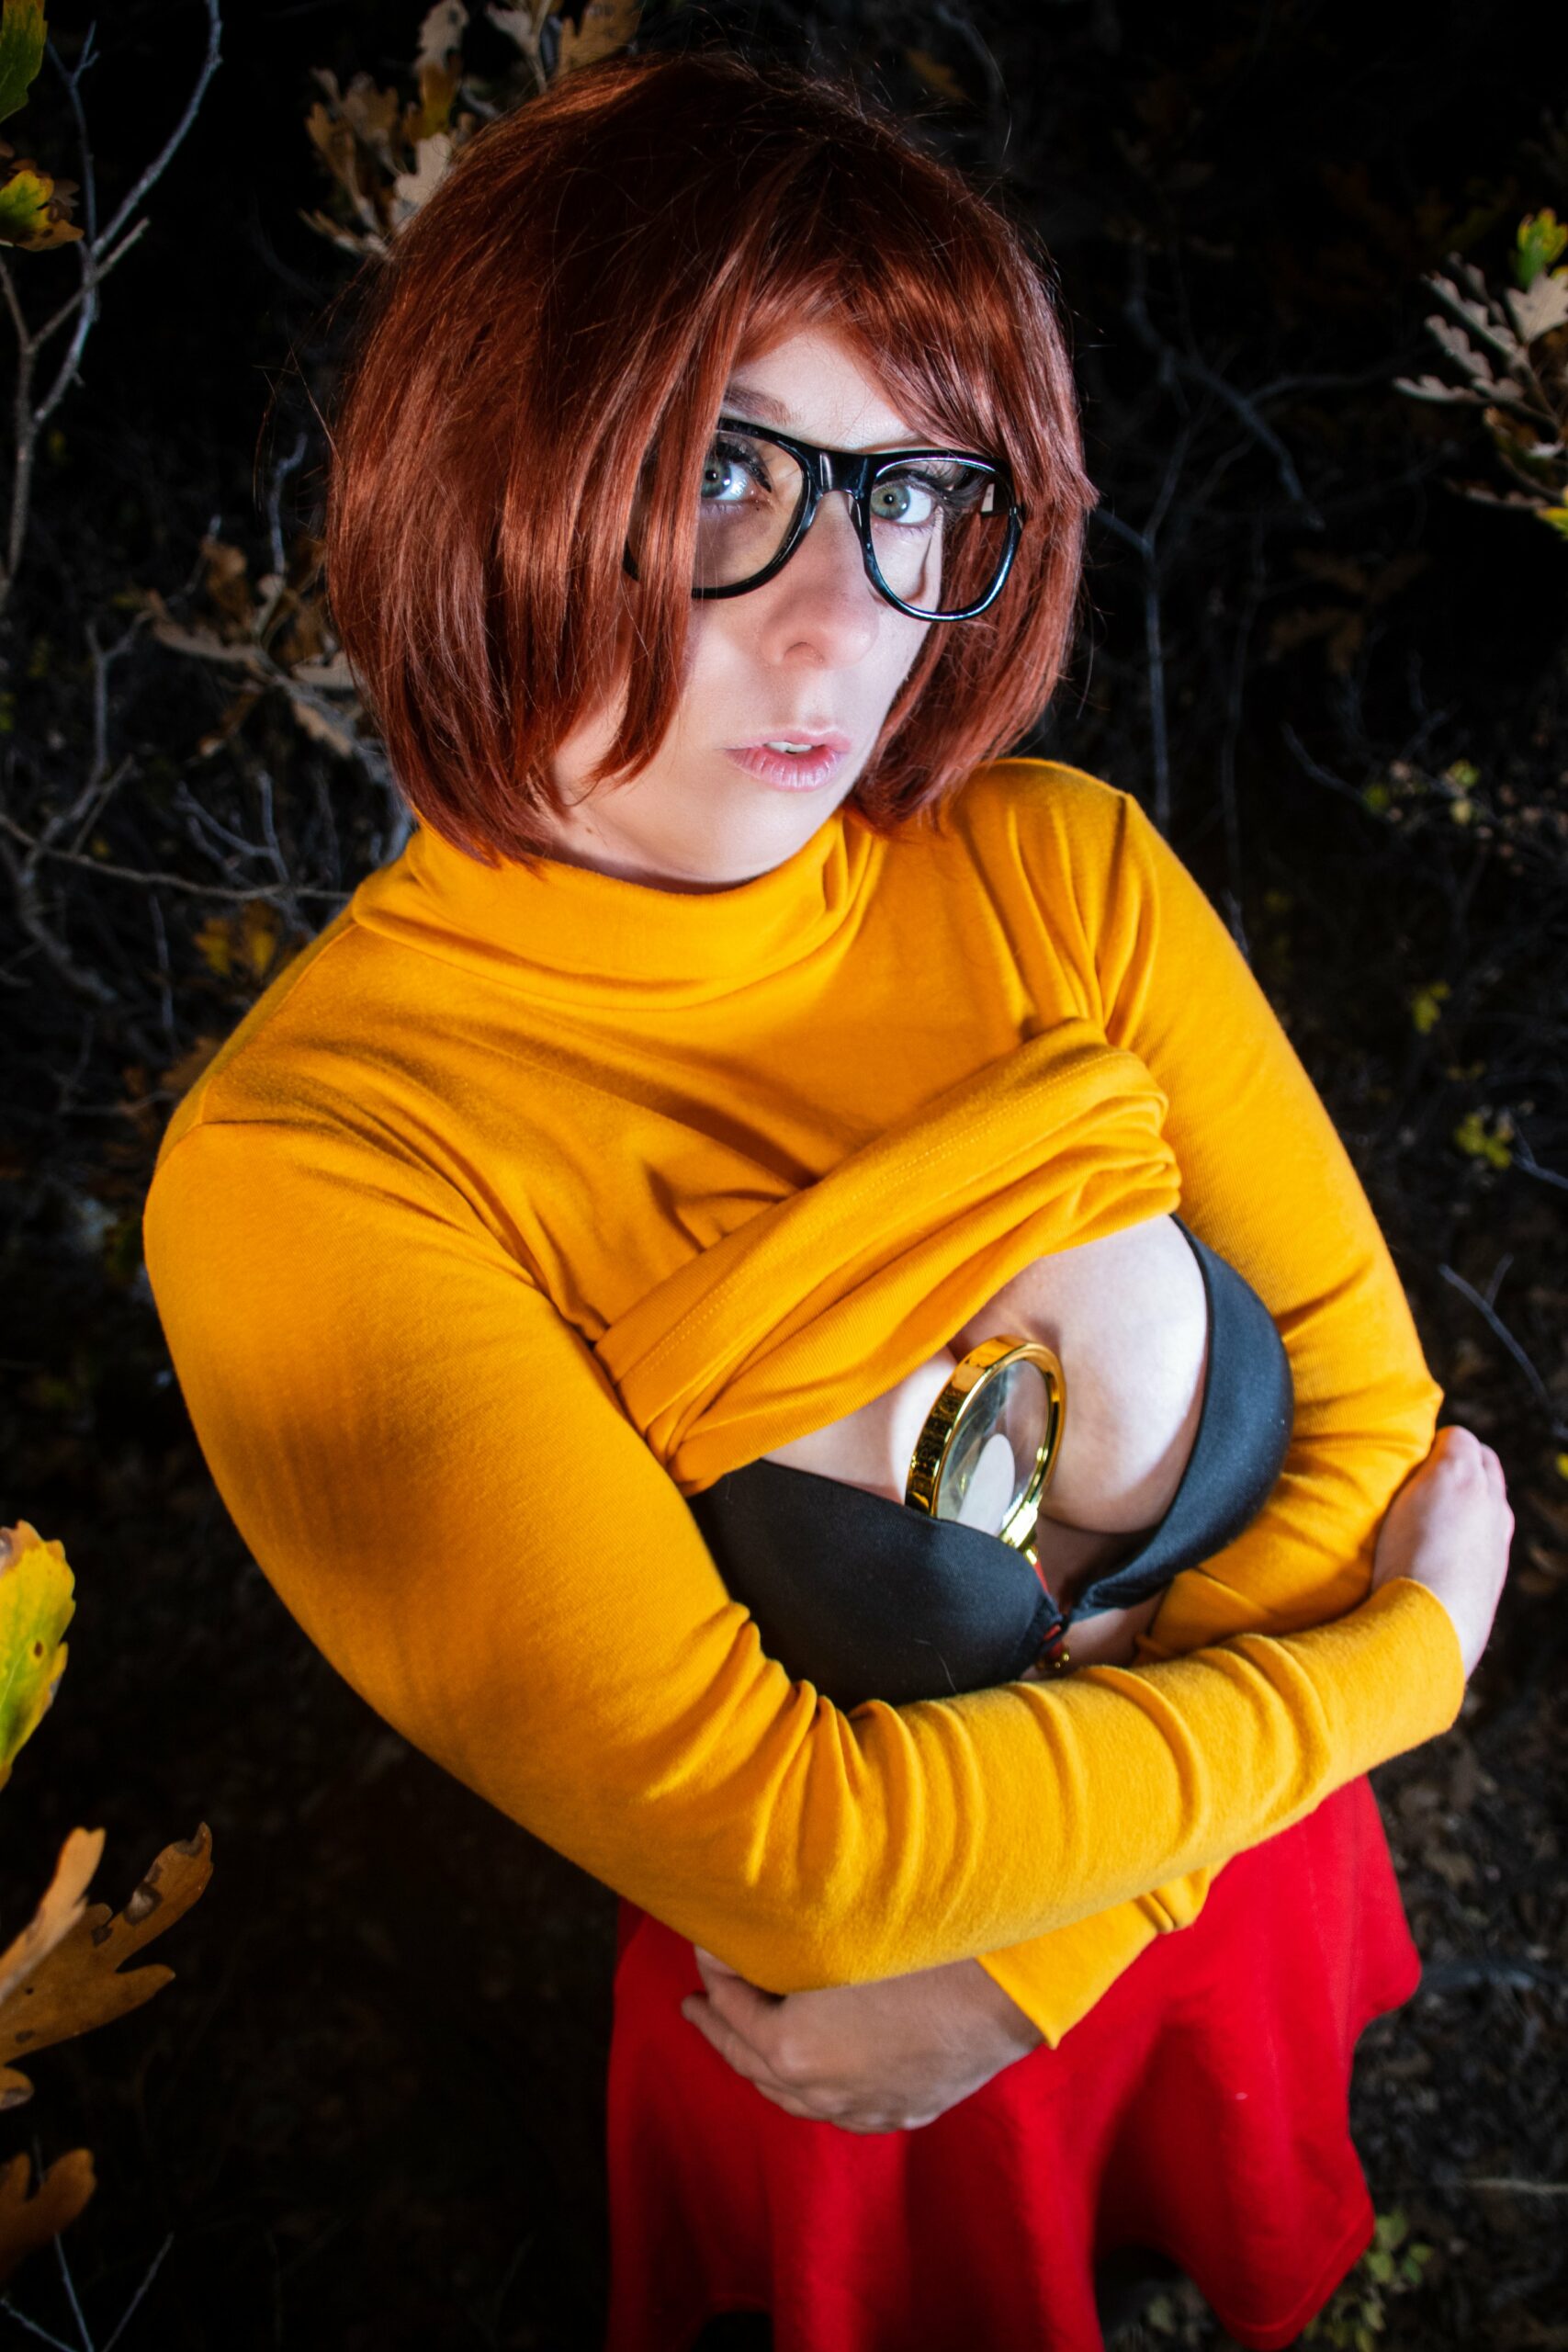 Hot Velma Cosplay by Trash Queen